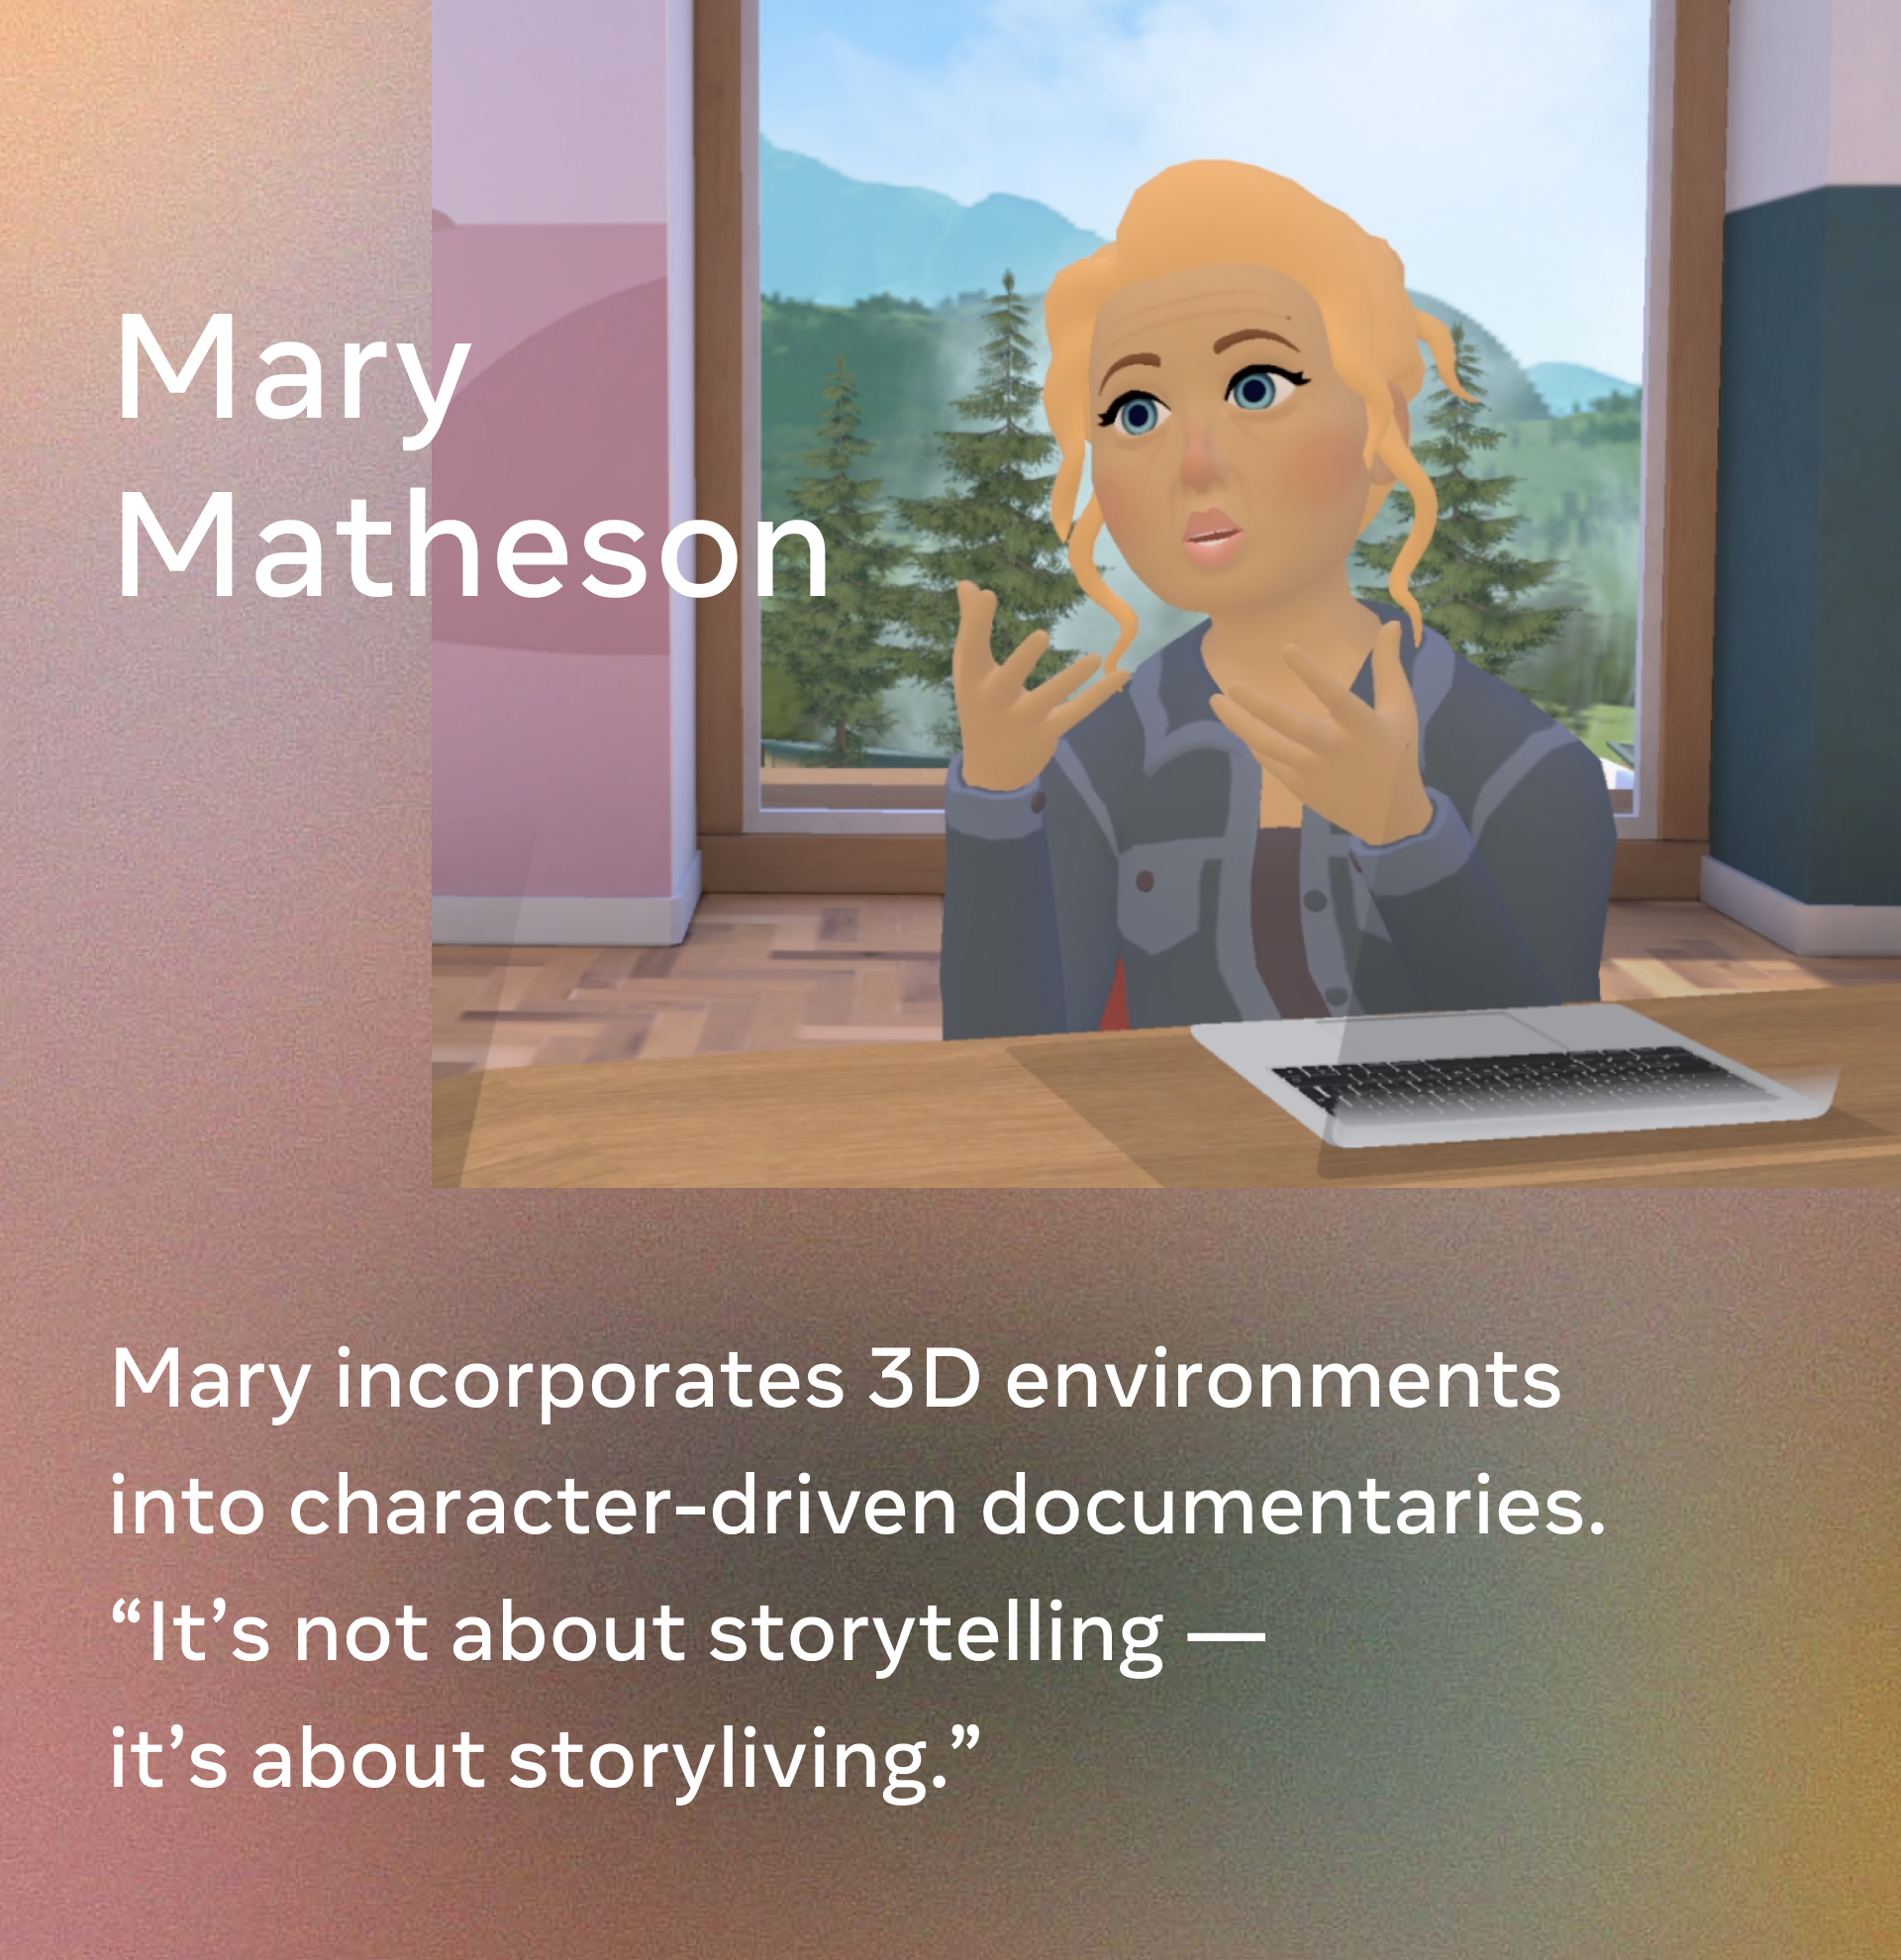 Mary Matheson. Mary incorporates 3D environments into character-driven documentaries. “It’s not about storytelling — it’s about storyliving.” 